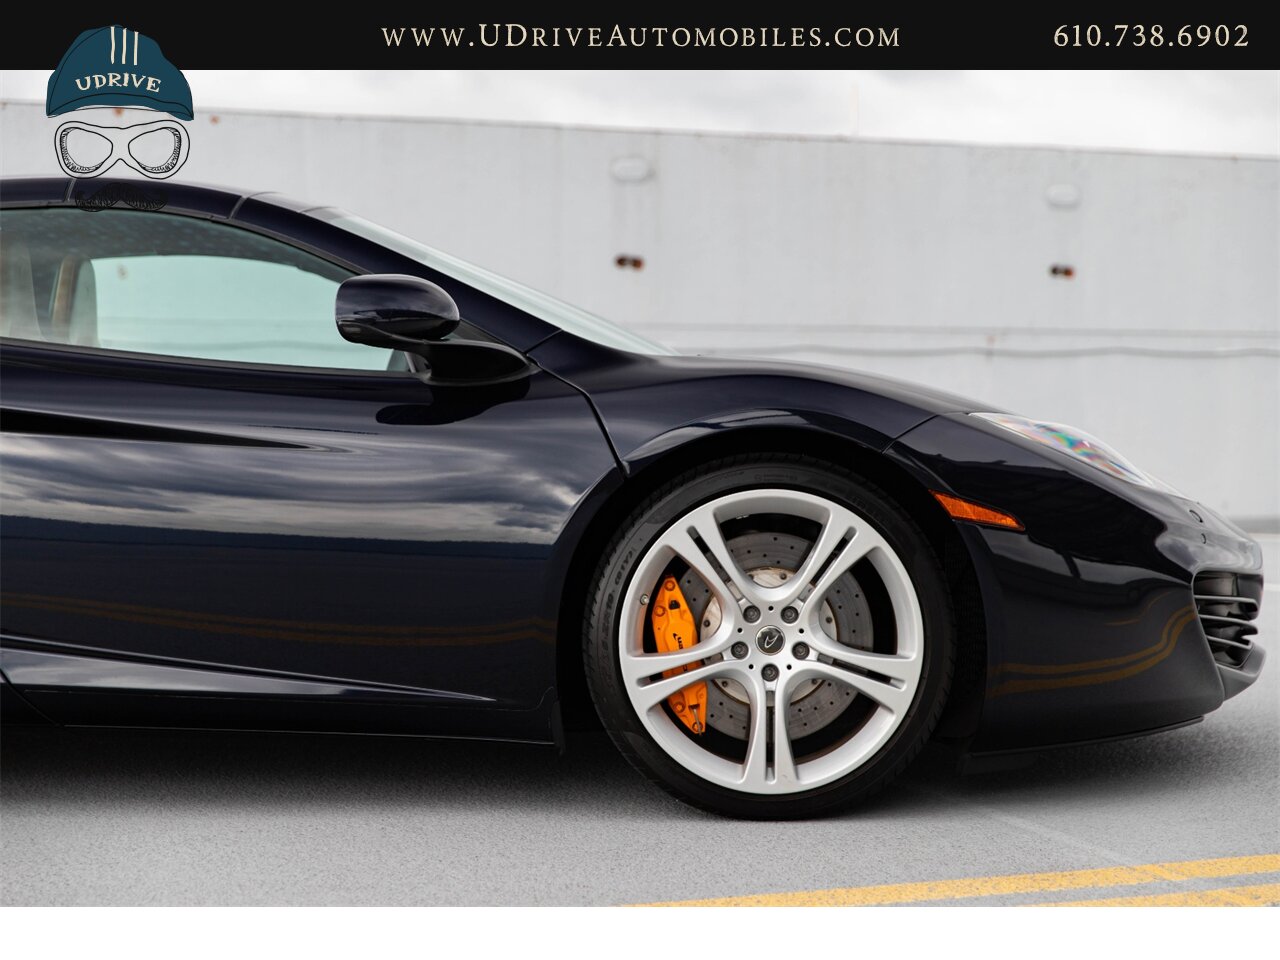 2013 McLaren MP4-12C Spider 1 Owner 6k Miles Carbon Fiber Full Leather  Sapphire Black over Natural Tan Leather - Photo 15 - West Chester, PA 19382